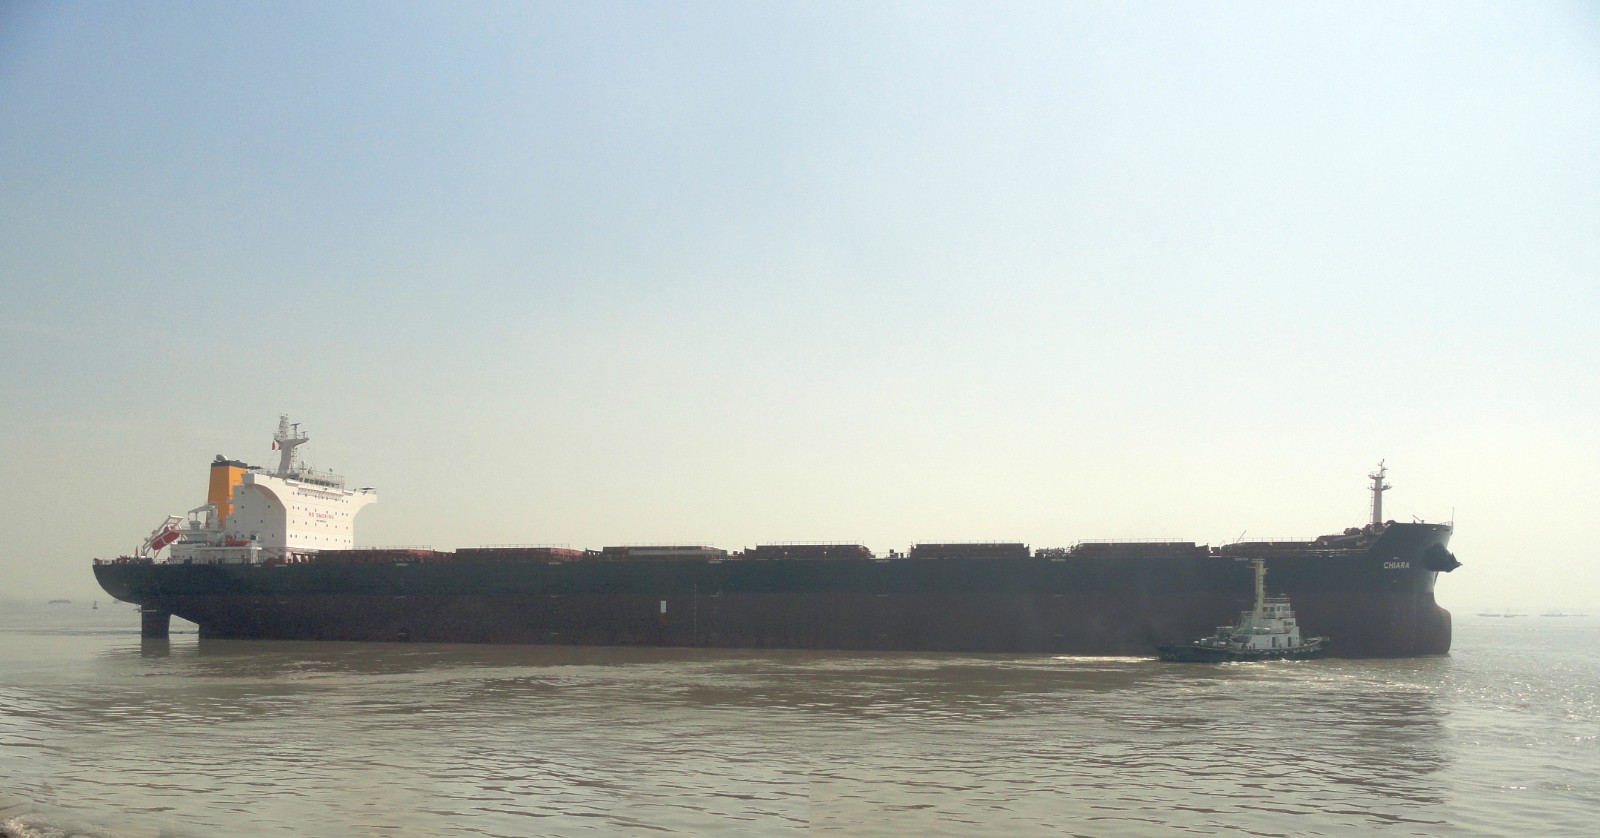 110000 DWT CRUDE/PRODUCT OIL TANKER